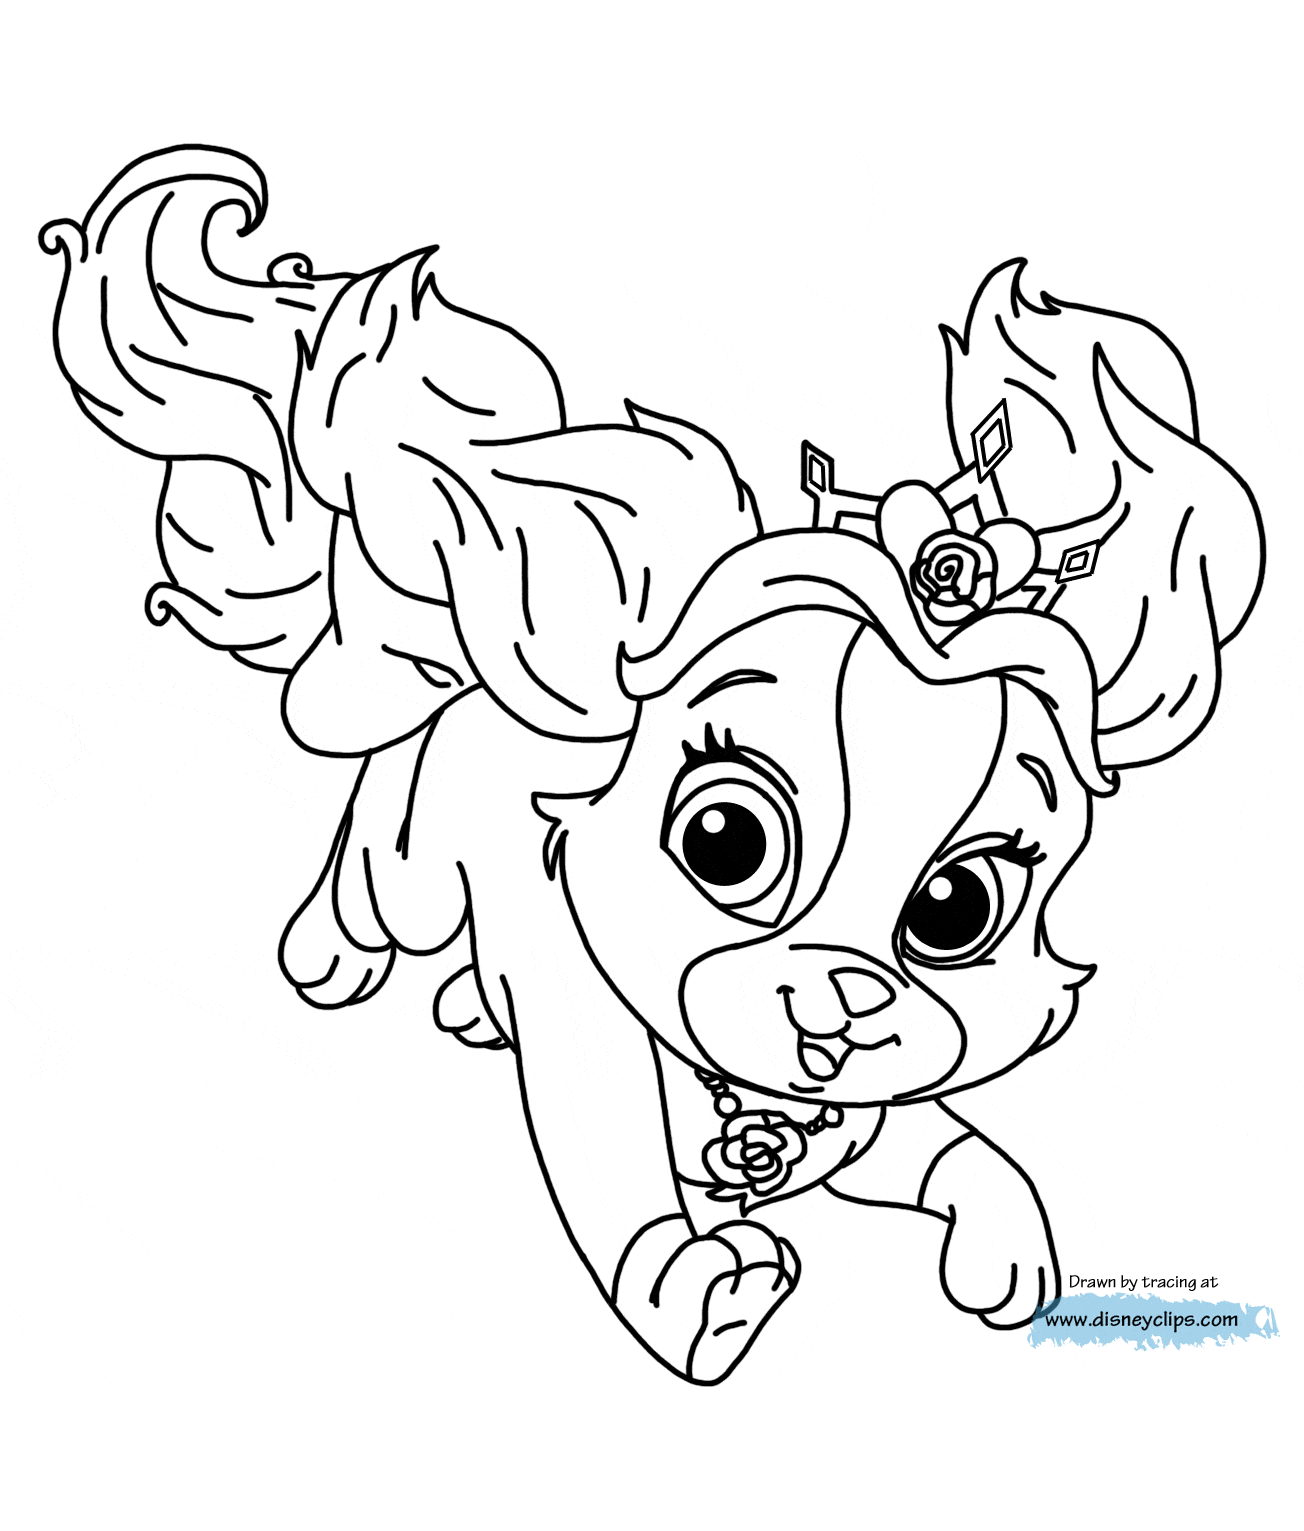 Disney pets coloring pages download and print for free